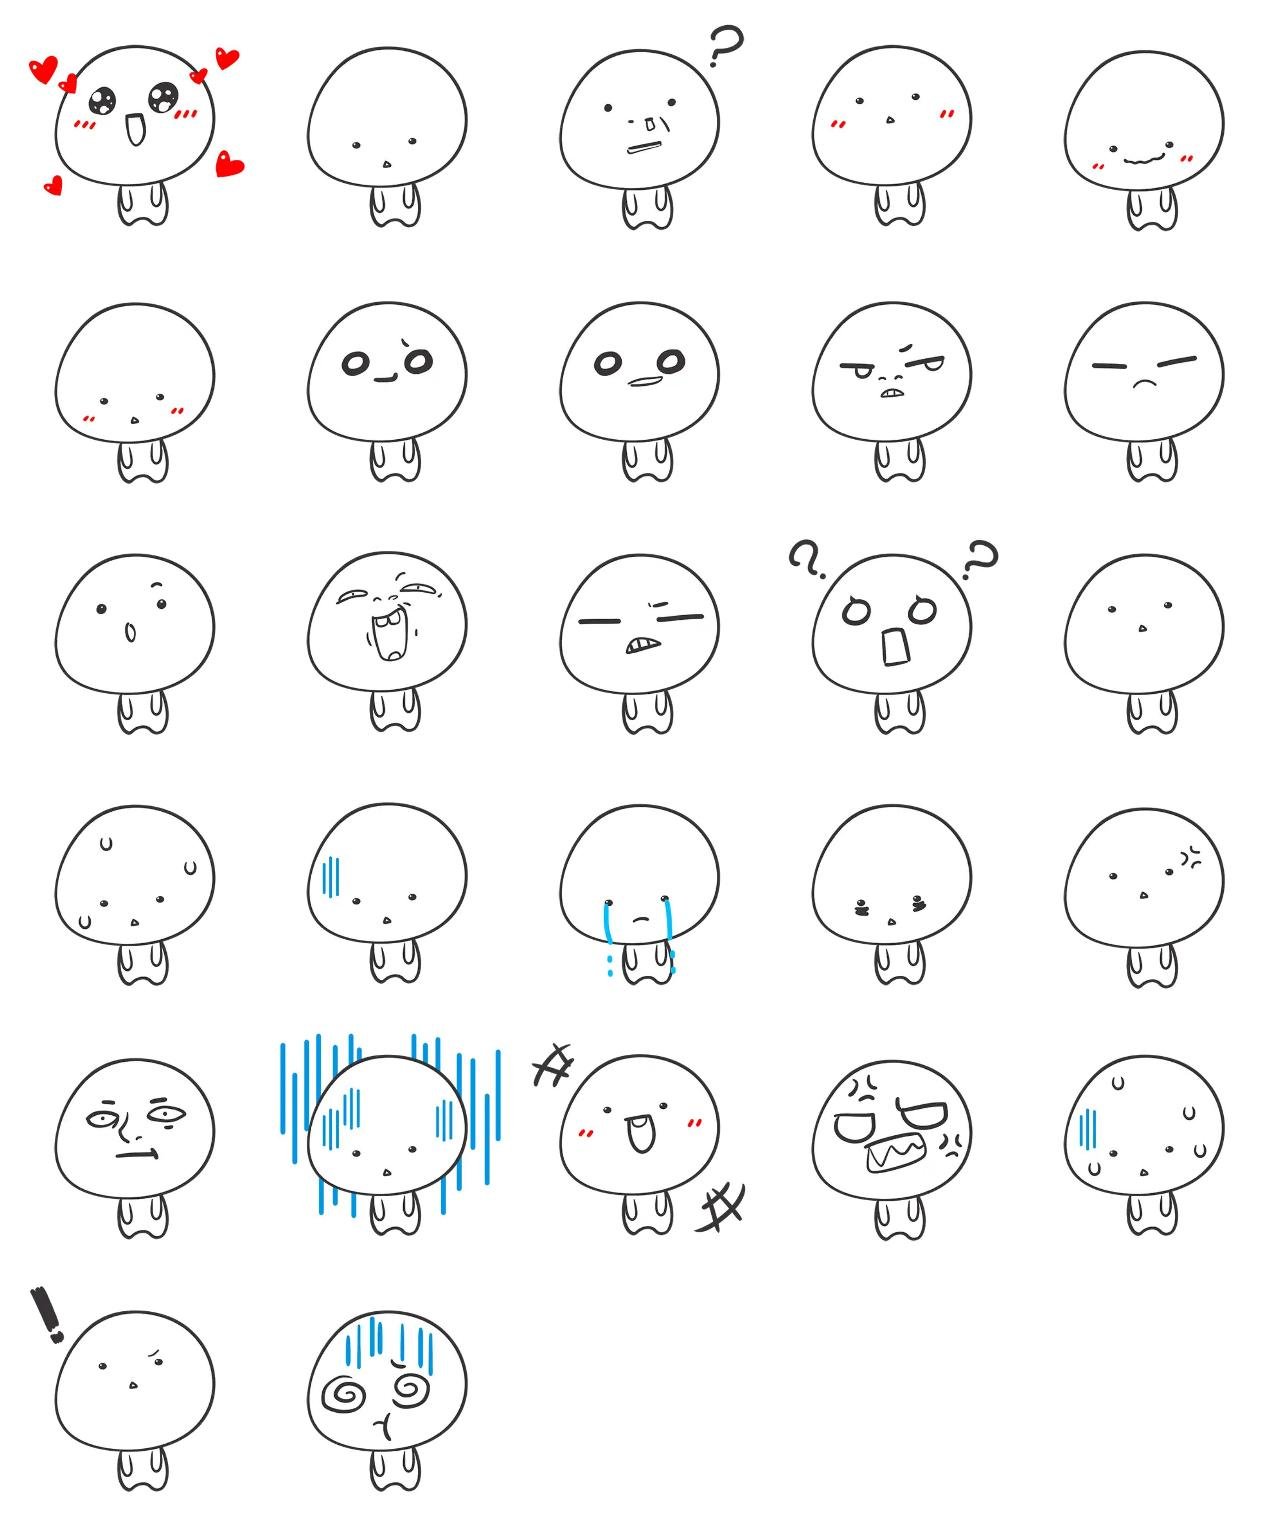 Cute round face Gag,People sticker pack for Whatsapp, Telegram, Signal, and others chatting and message apps